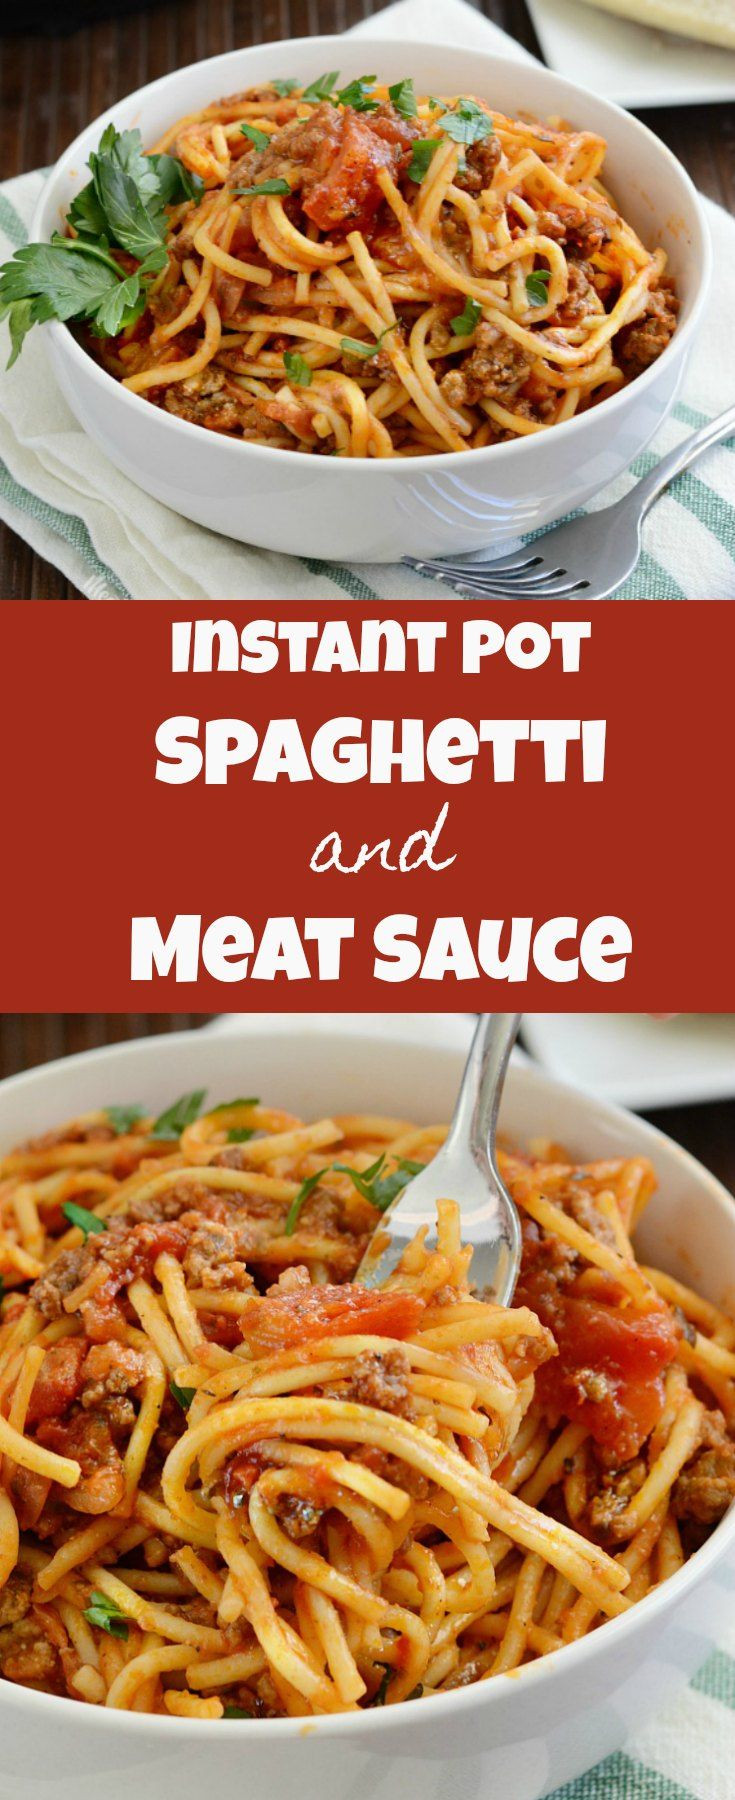 Pressure Cooker Spaghetti And Meat Sauce
 Instant Pot Spaghetti and Meat Sauce Recipe